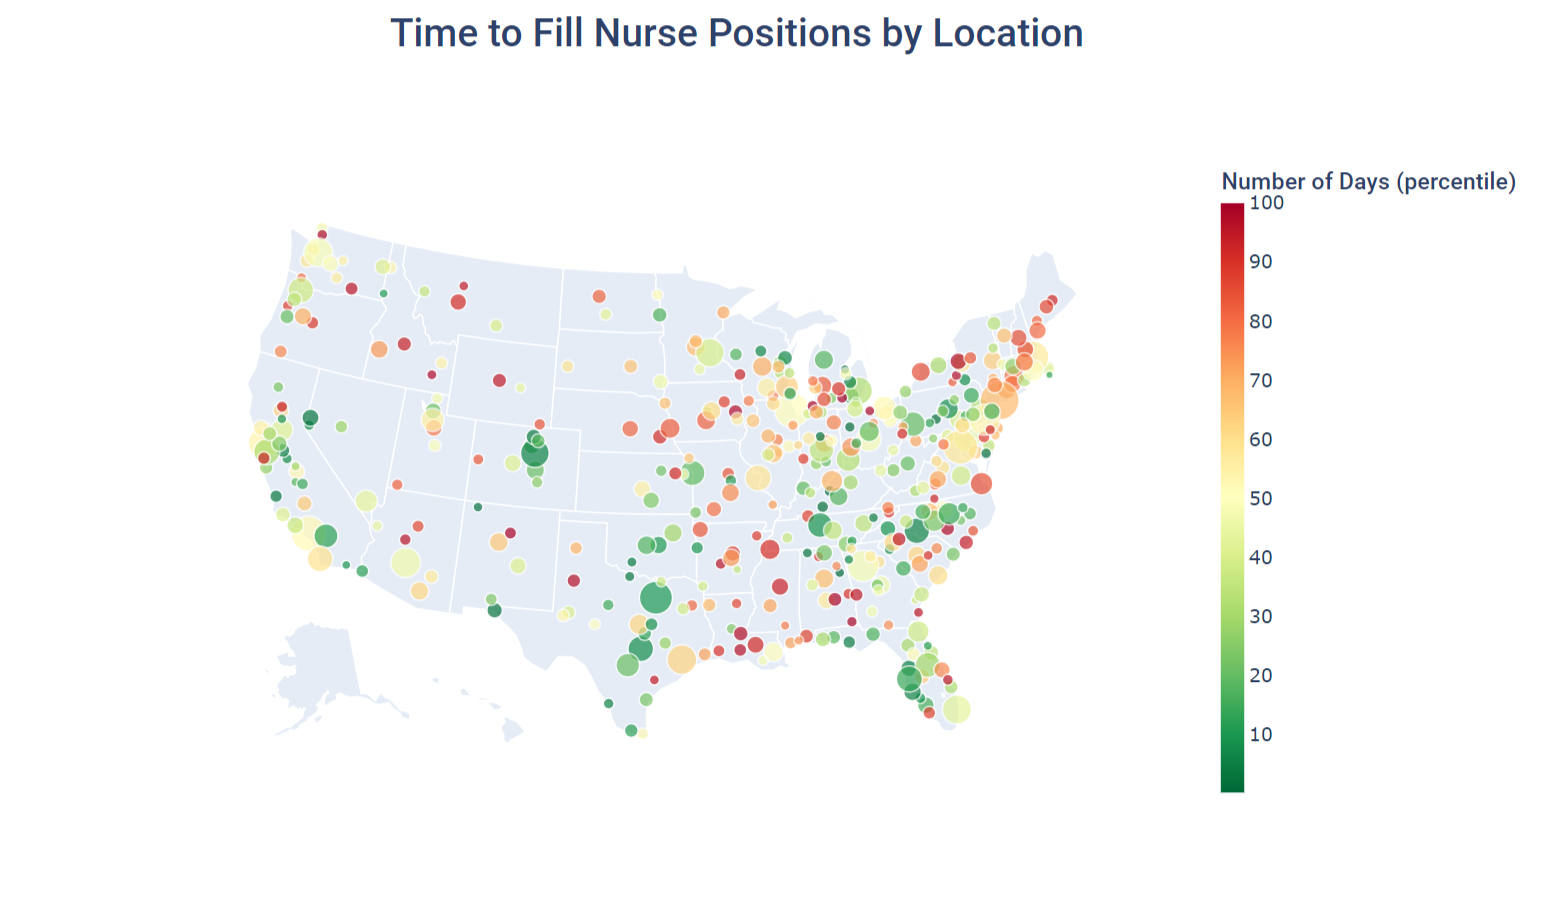 Time to Fill Nurse Positions by Locations